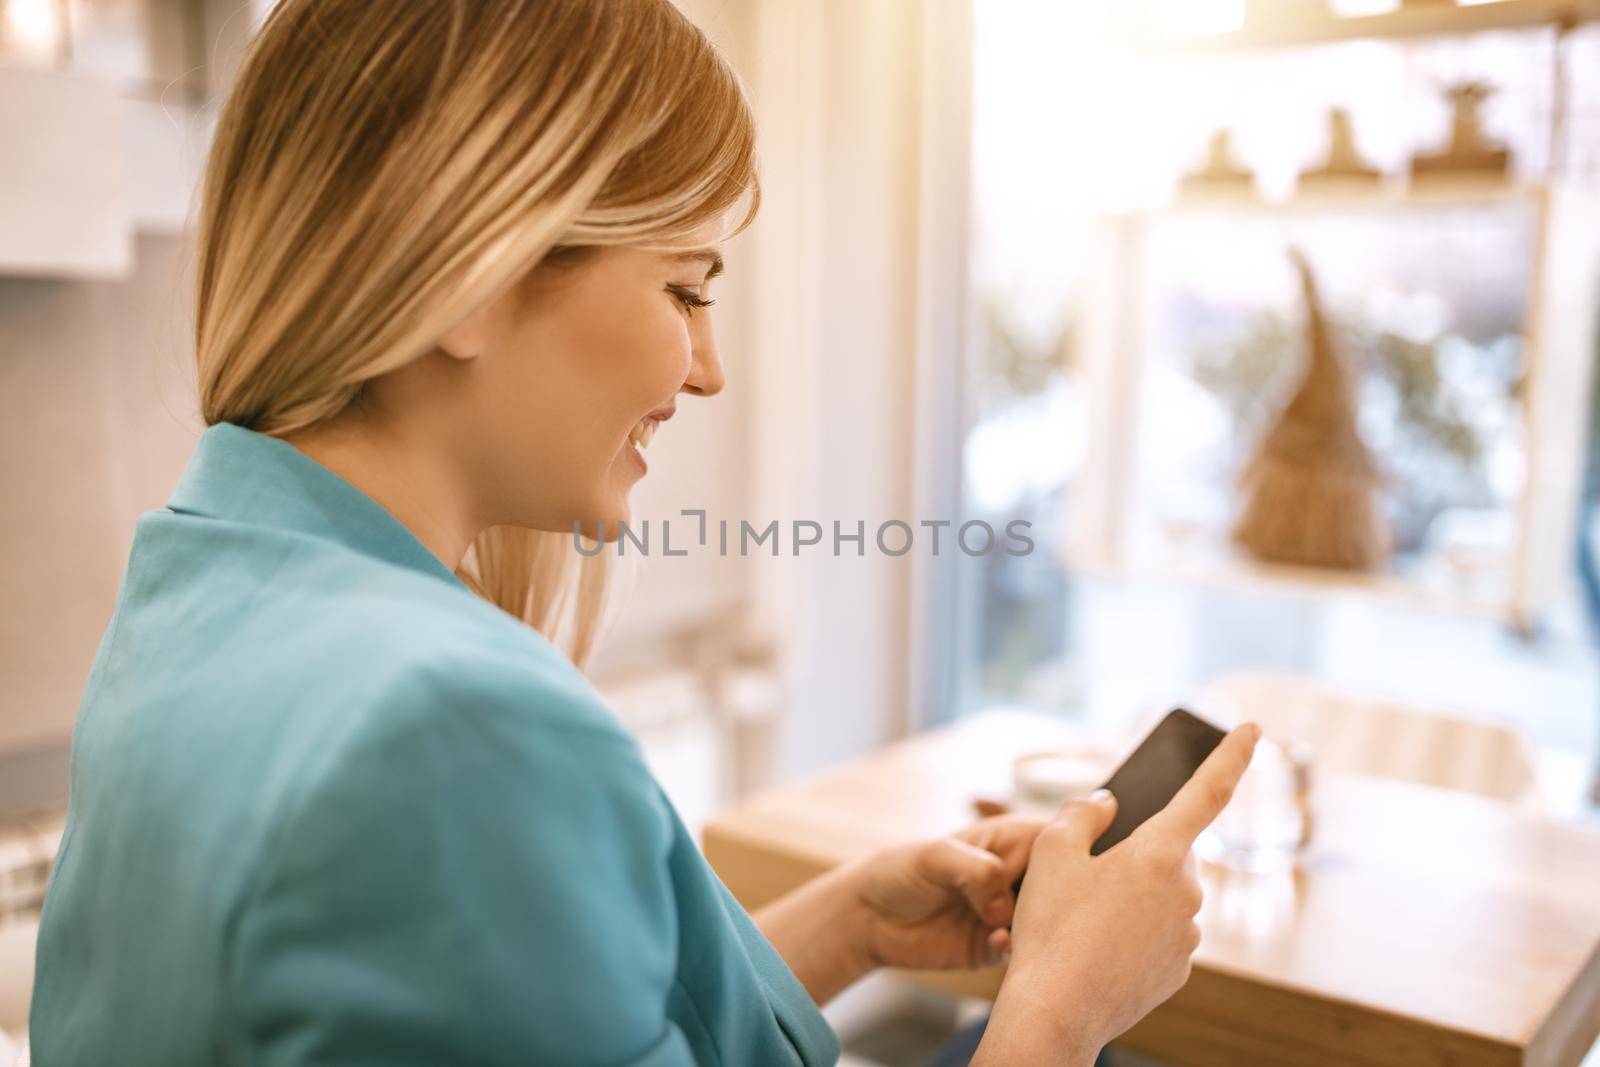 Young smiling businesswoman on a break in a cafe. He is drinking coffee and using smartphone. 